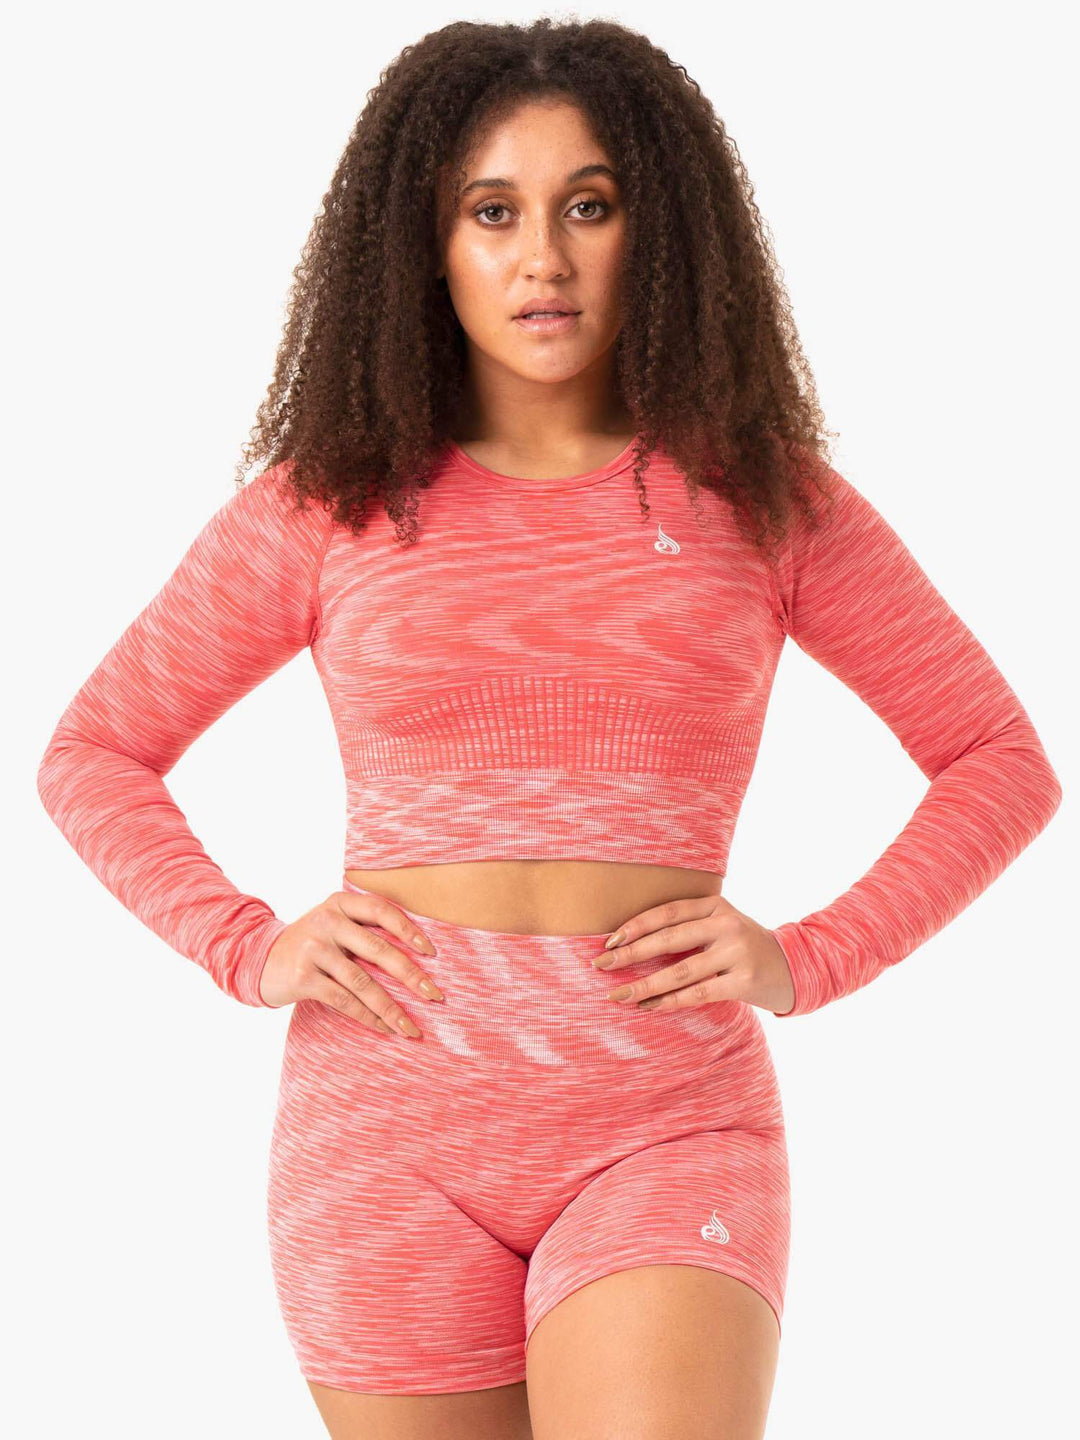 Evolve Seamless Long Sleeve Top - Coral Clothing Ryderwear 